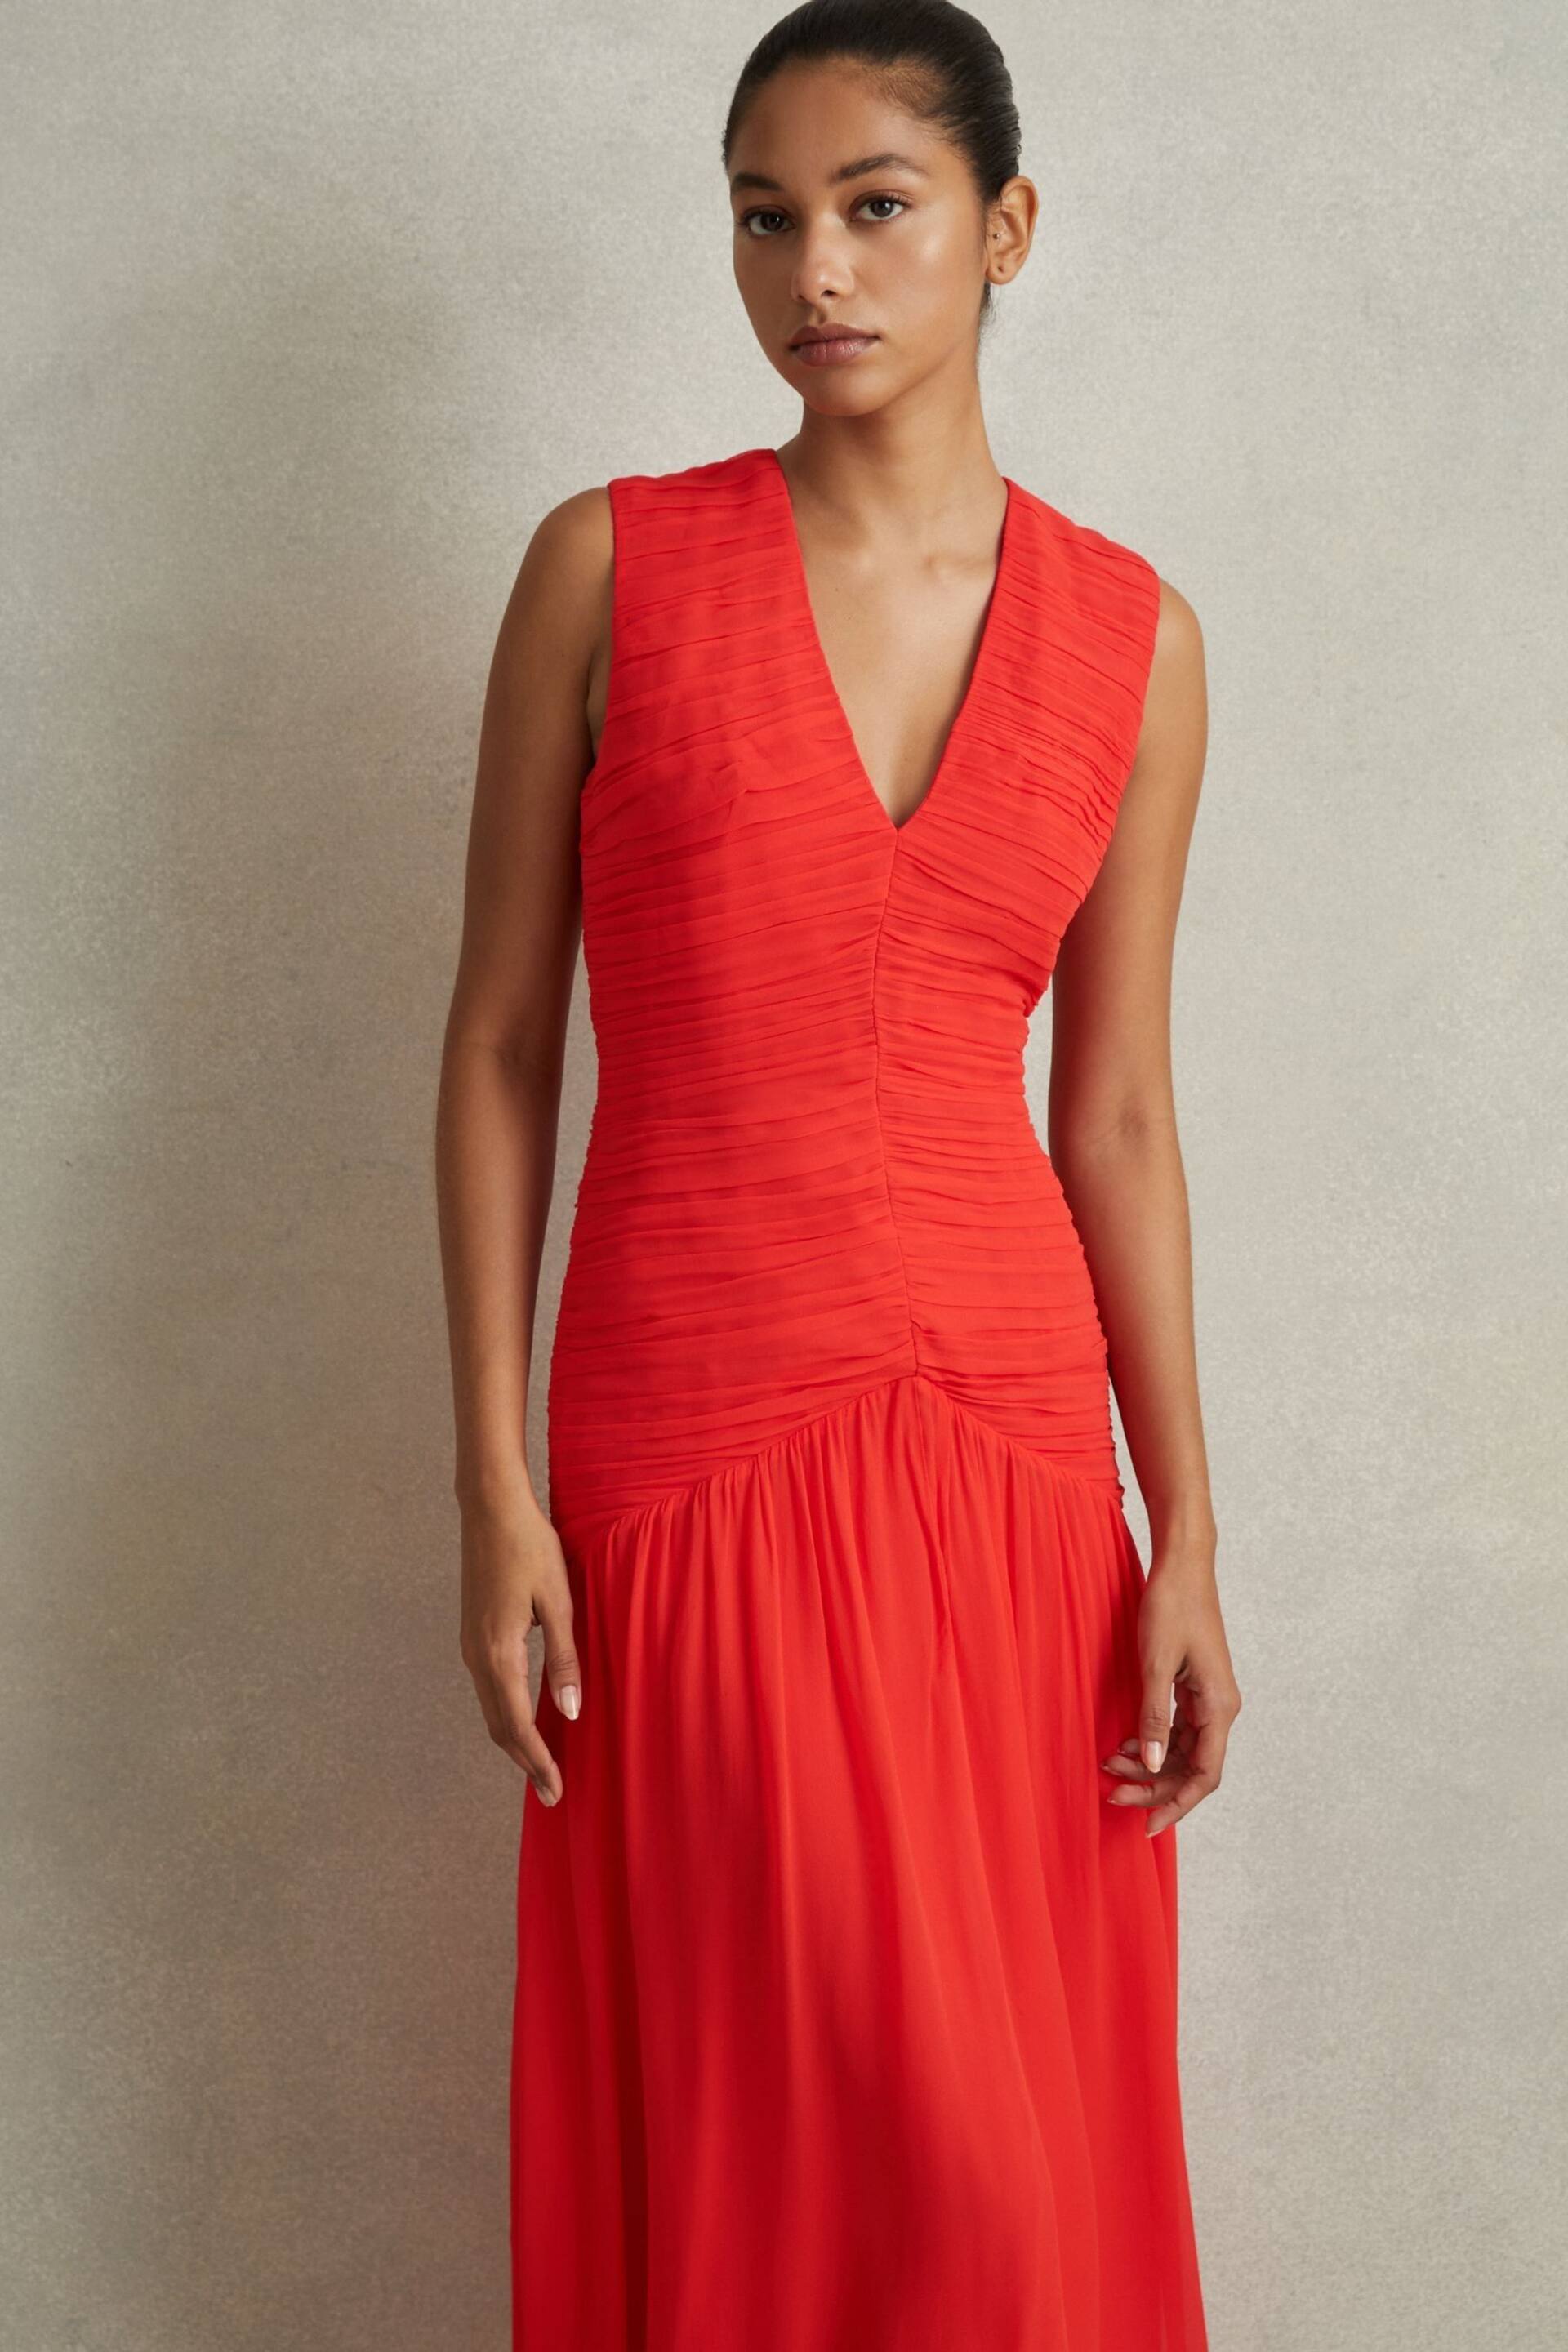 Reiss Coral Saffy Petite Ruched Bodycon Midi Dress - Image 4 of 7